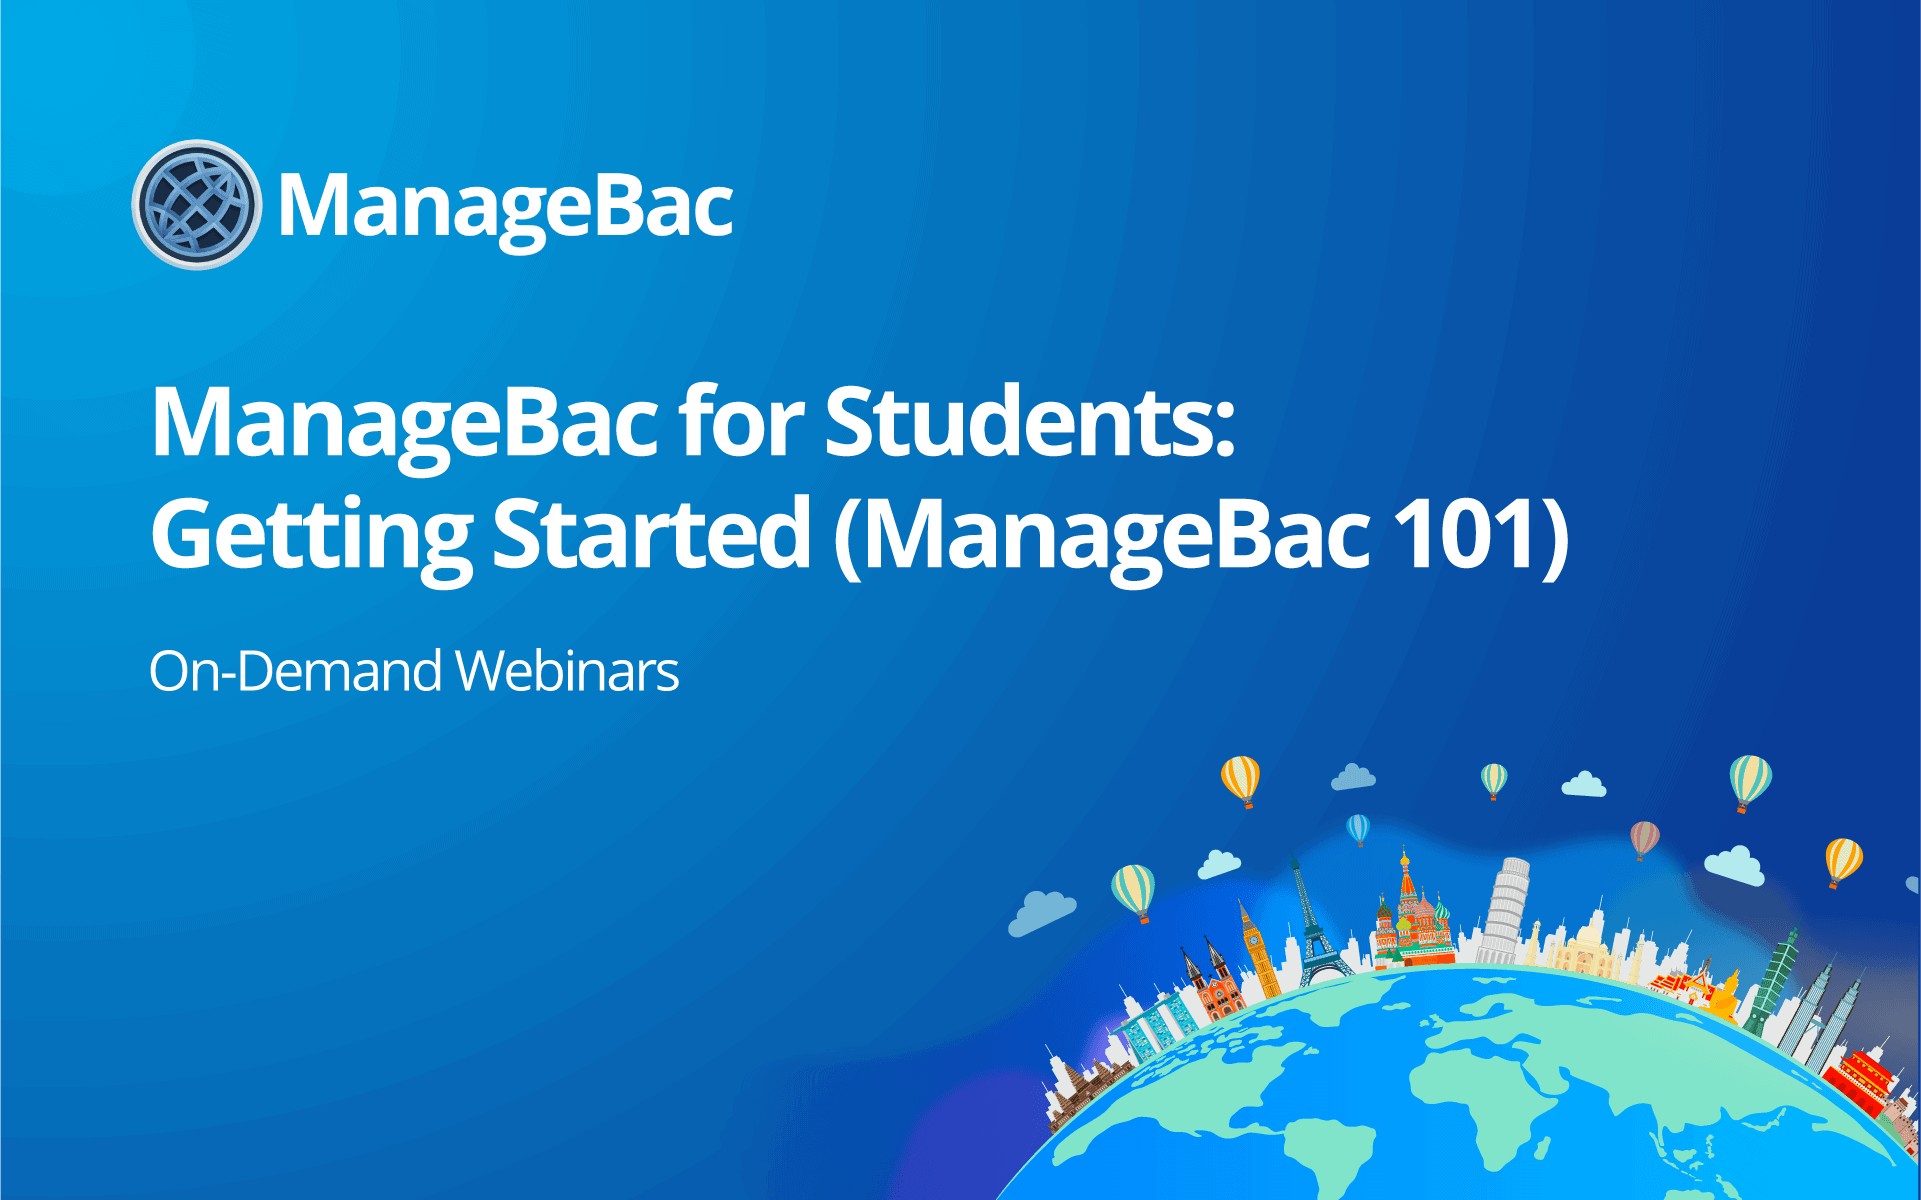 ManageBac for Students: Getting Started (ManageBac 101)